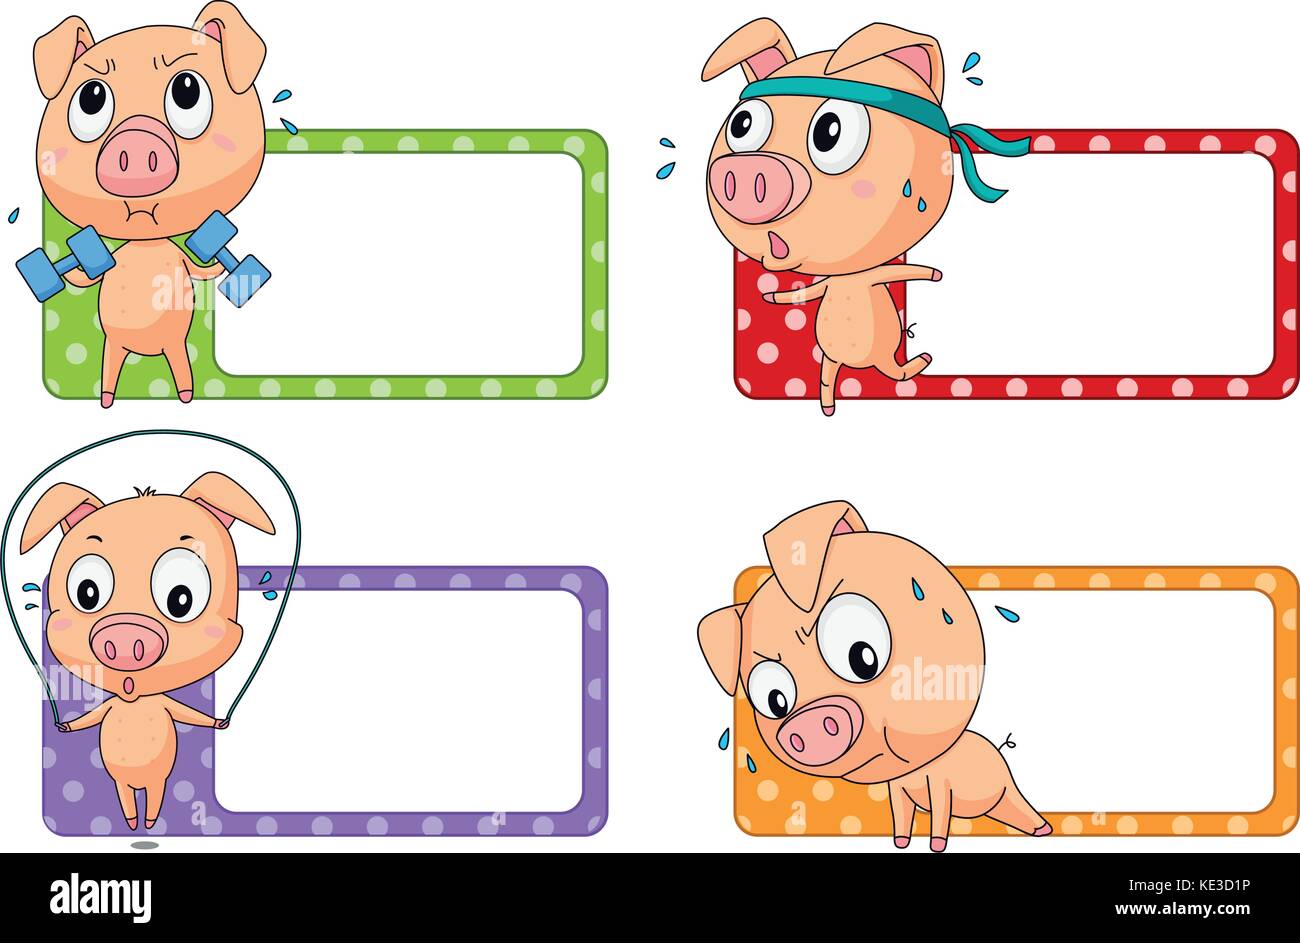 Label design with pig exercising illustration Stock Vector